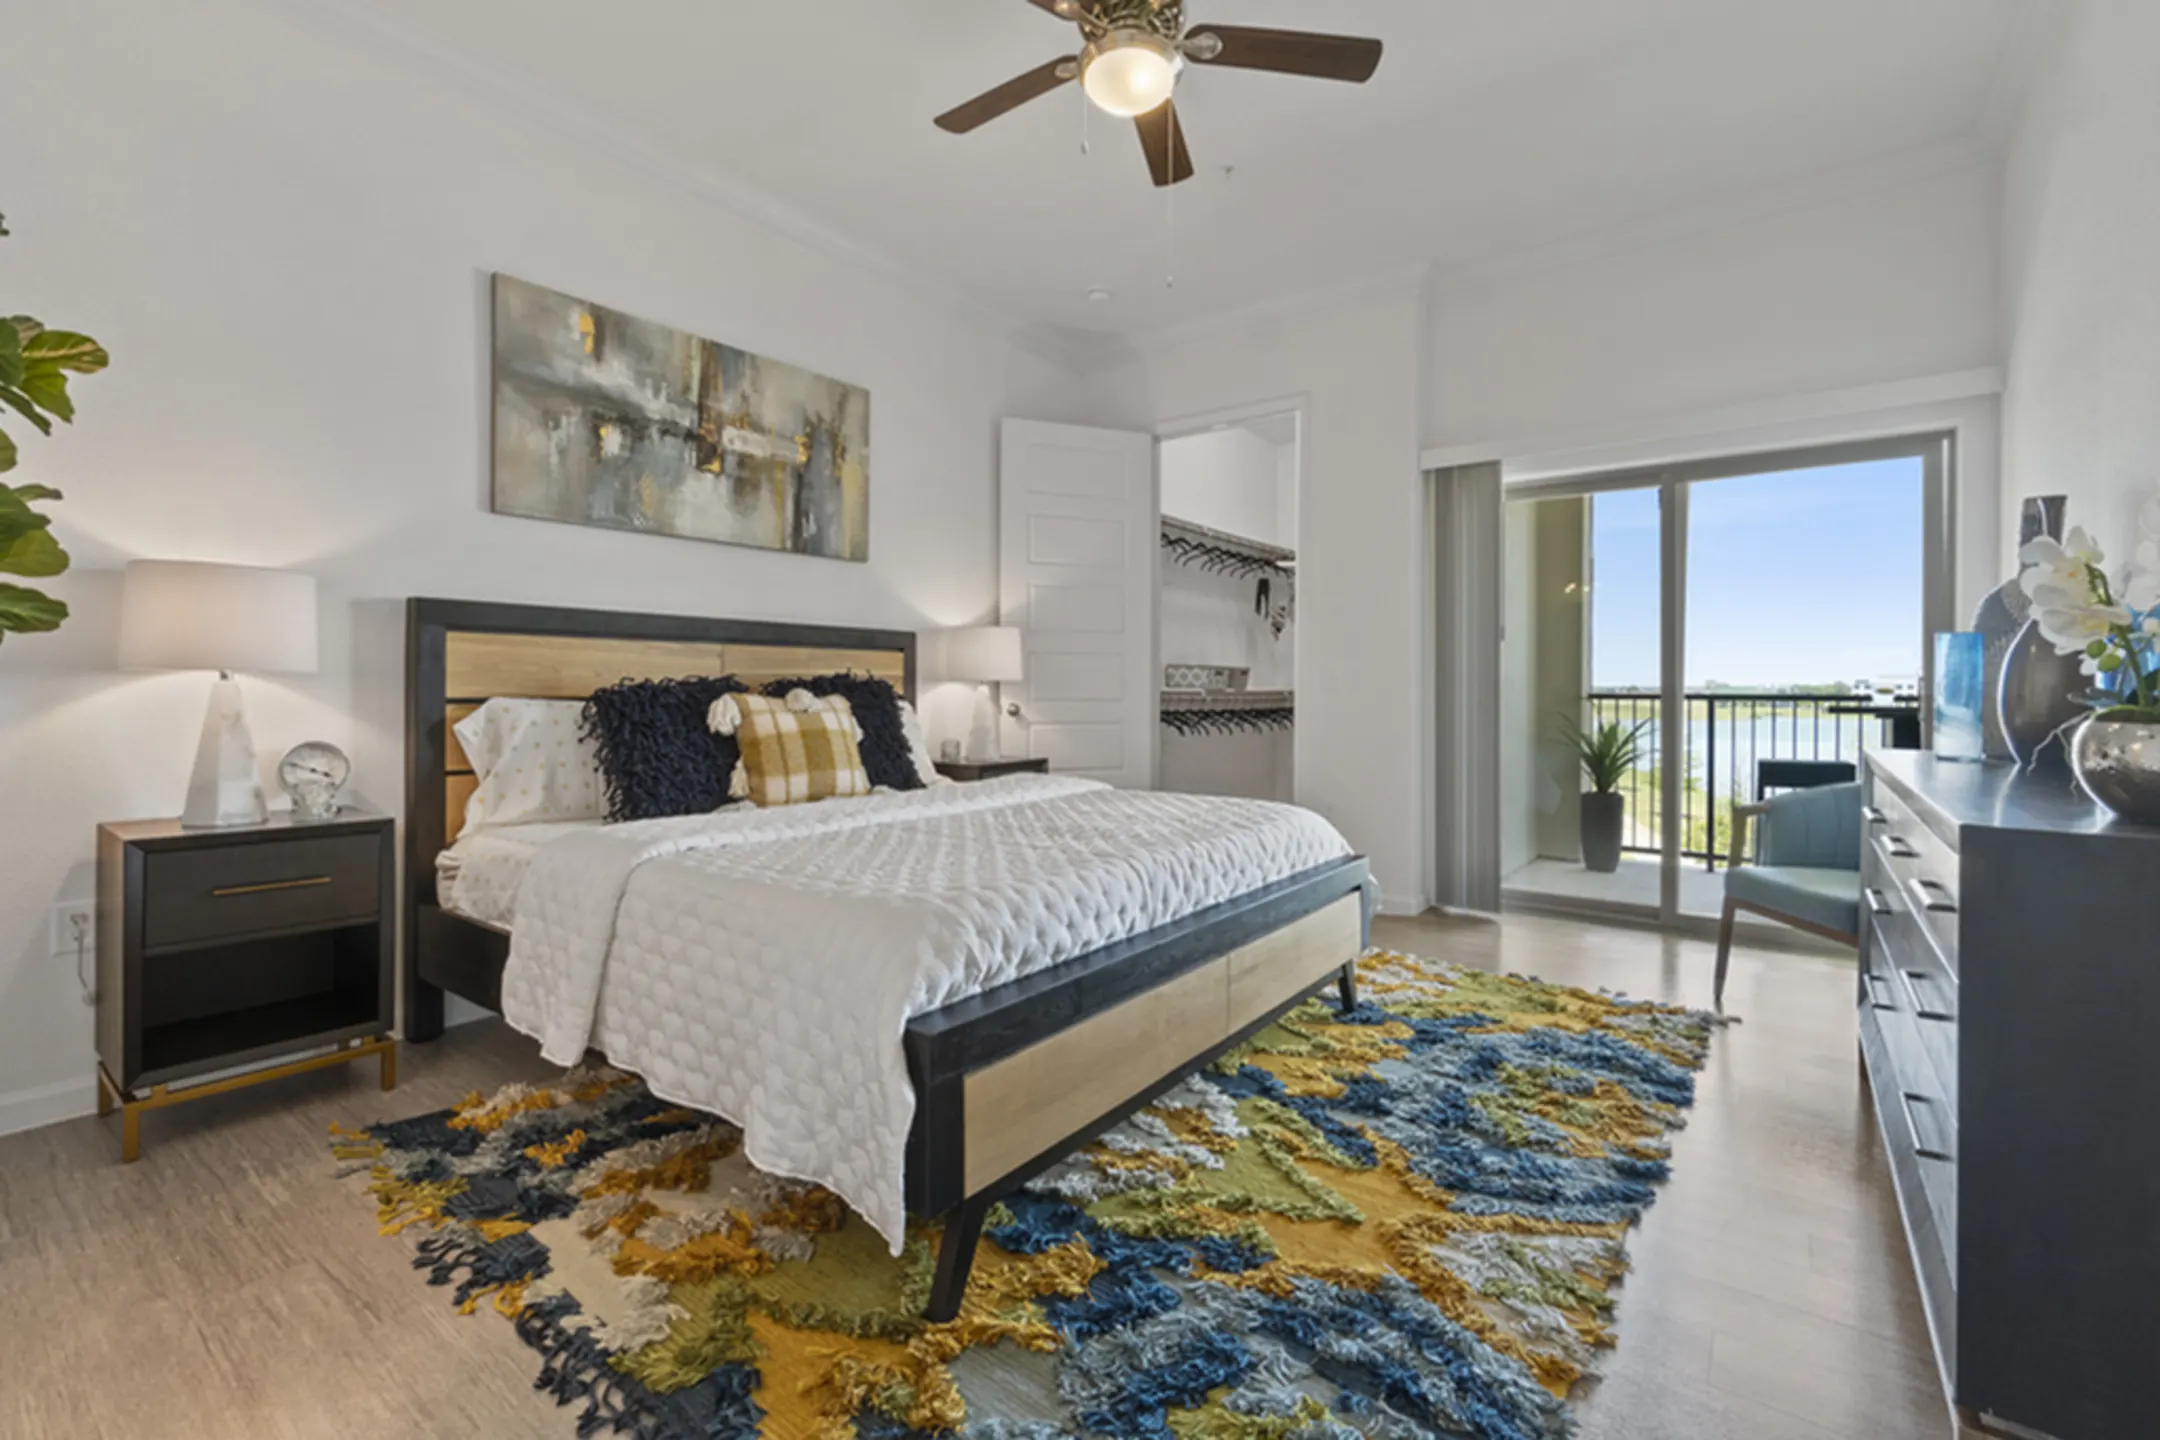 Bedroom - The Mansions at Mercer Crossing - Farmers Branch, TX